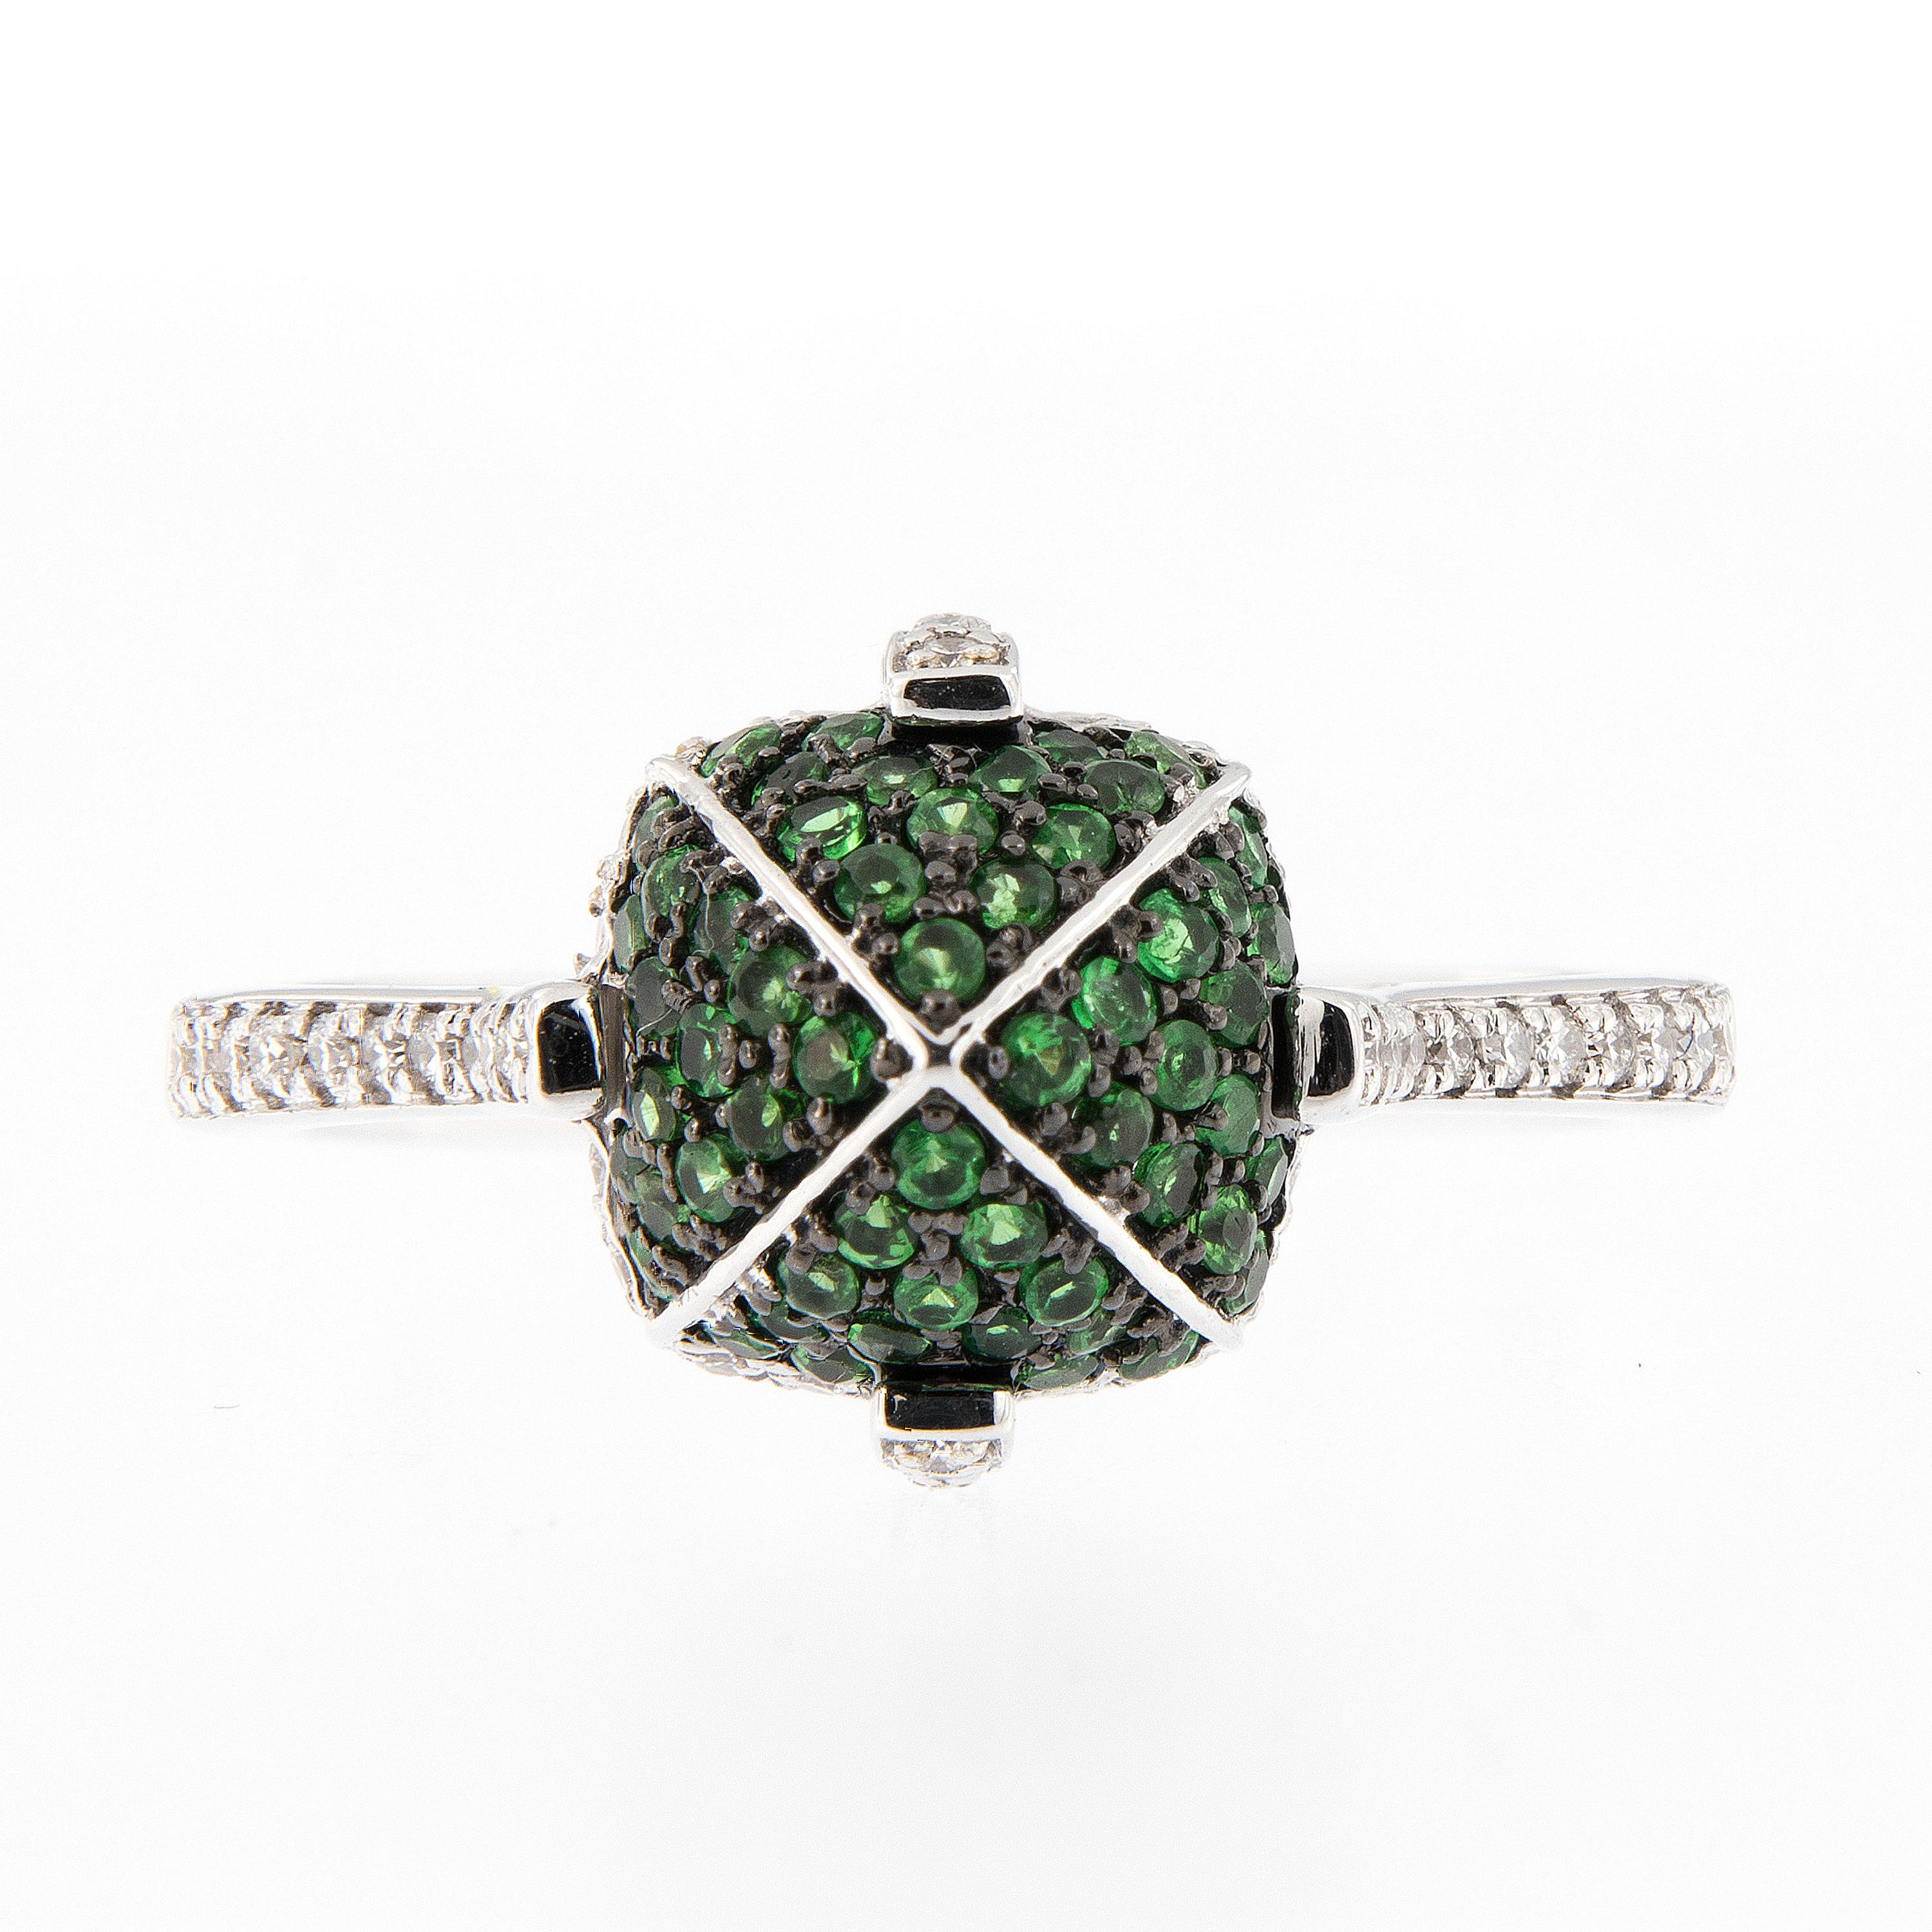 Striking 18k white gold sugarloaf design ring pave set with tsavorites and accented with diamonds. Designed by Goshwara from New York. Ring size 6.5. Top of ring measures 9mm x 9mm. Marked Goshwara

Tsavorite 0.42 cttw
Diamond 0.19 cttw